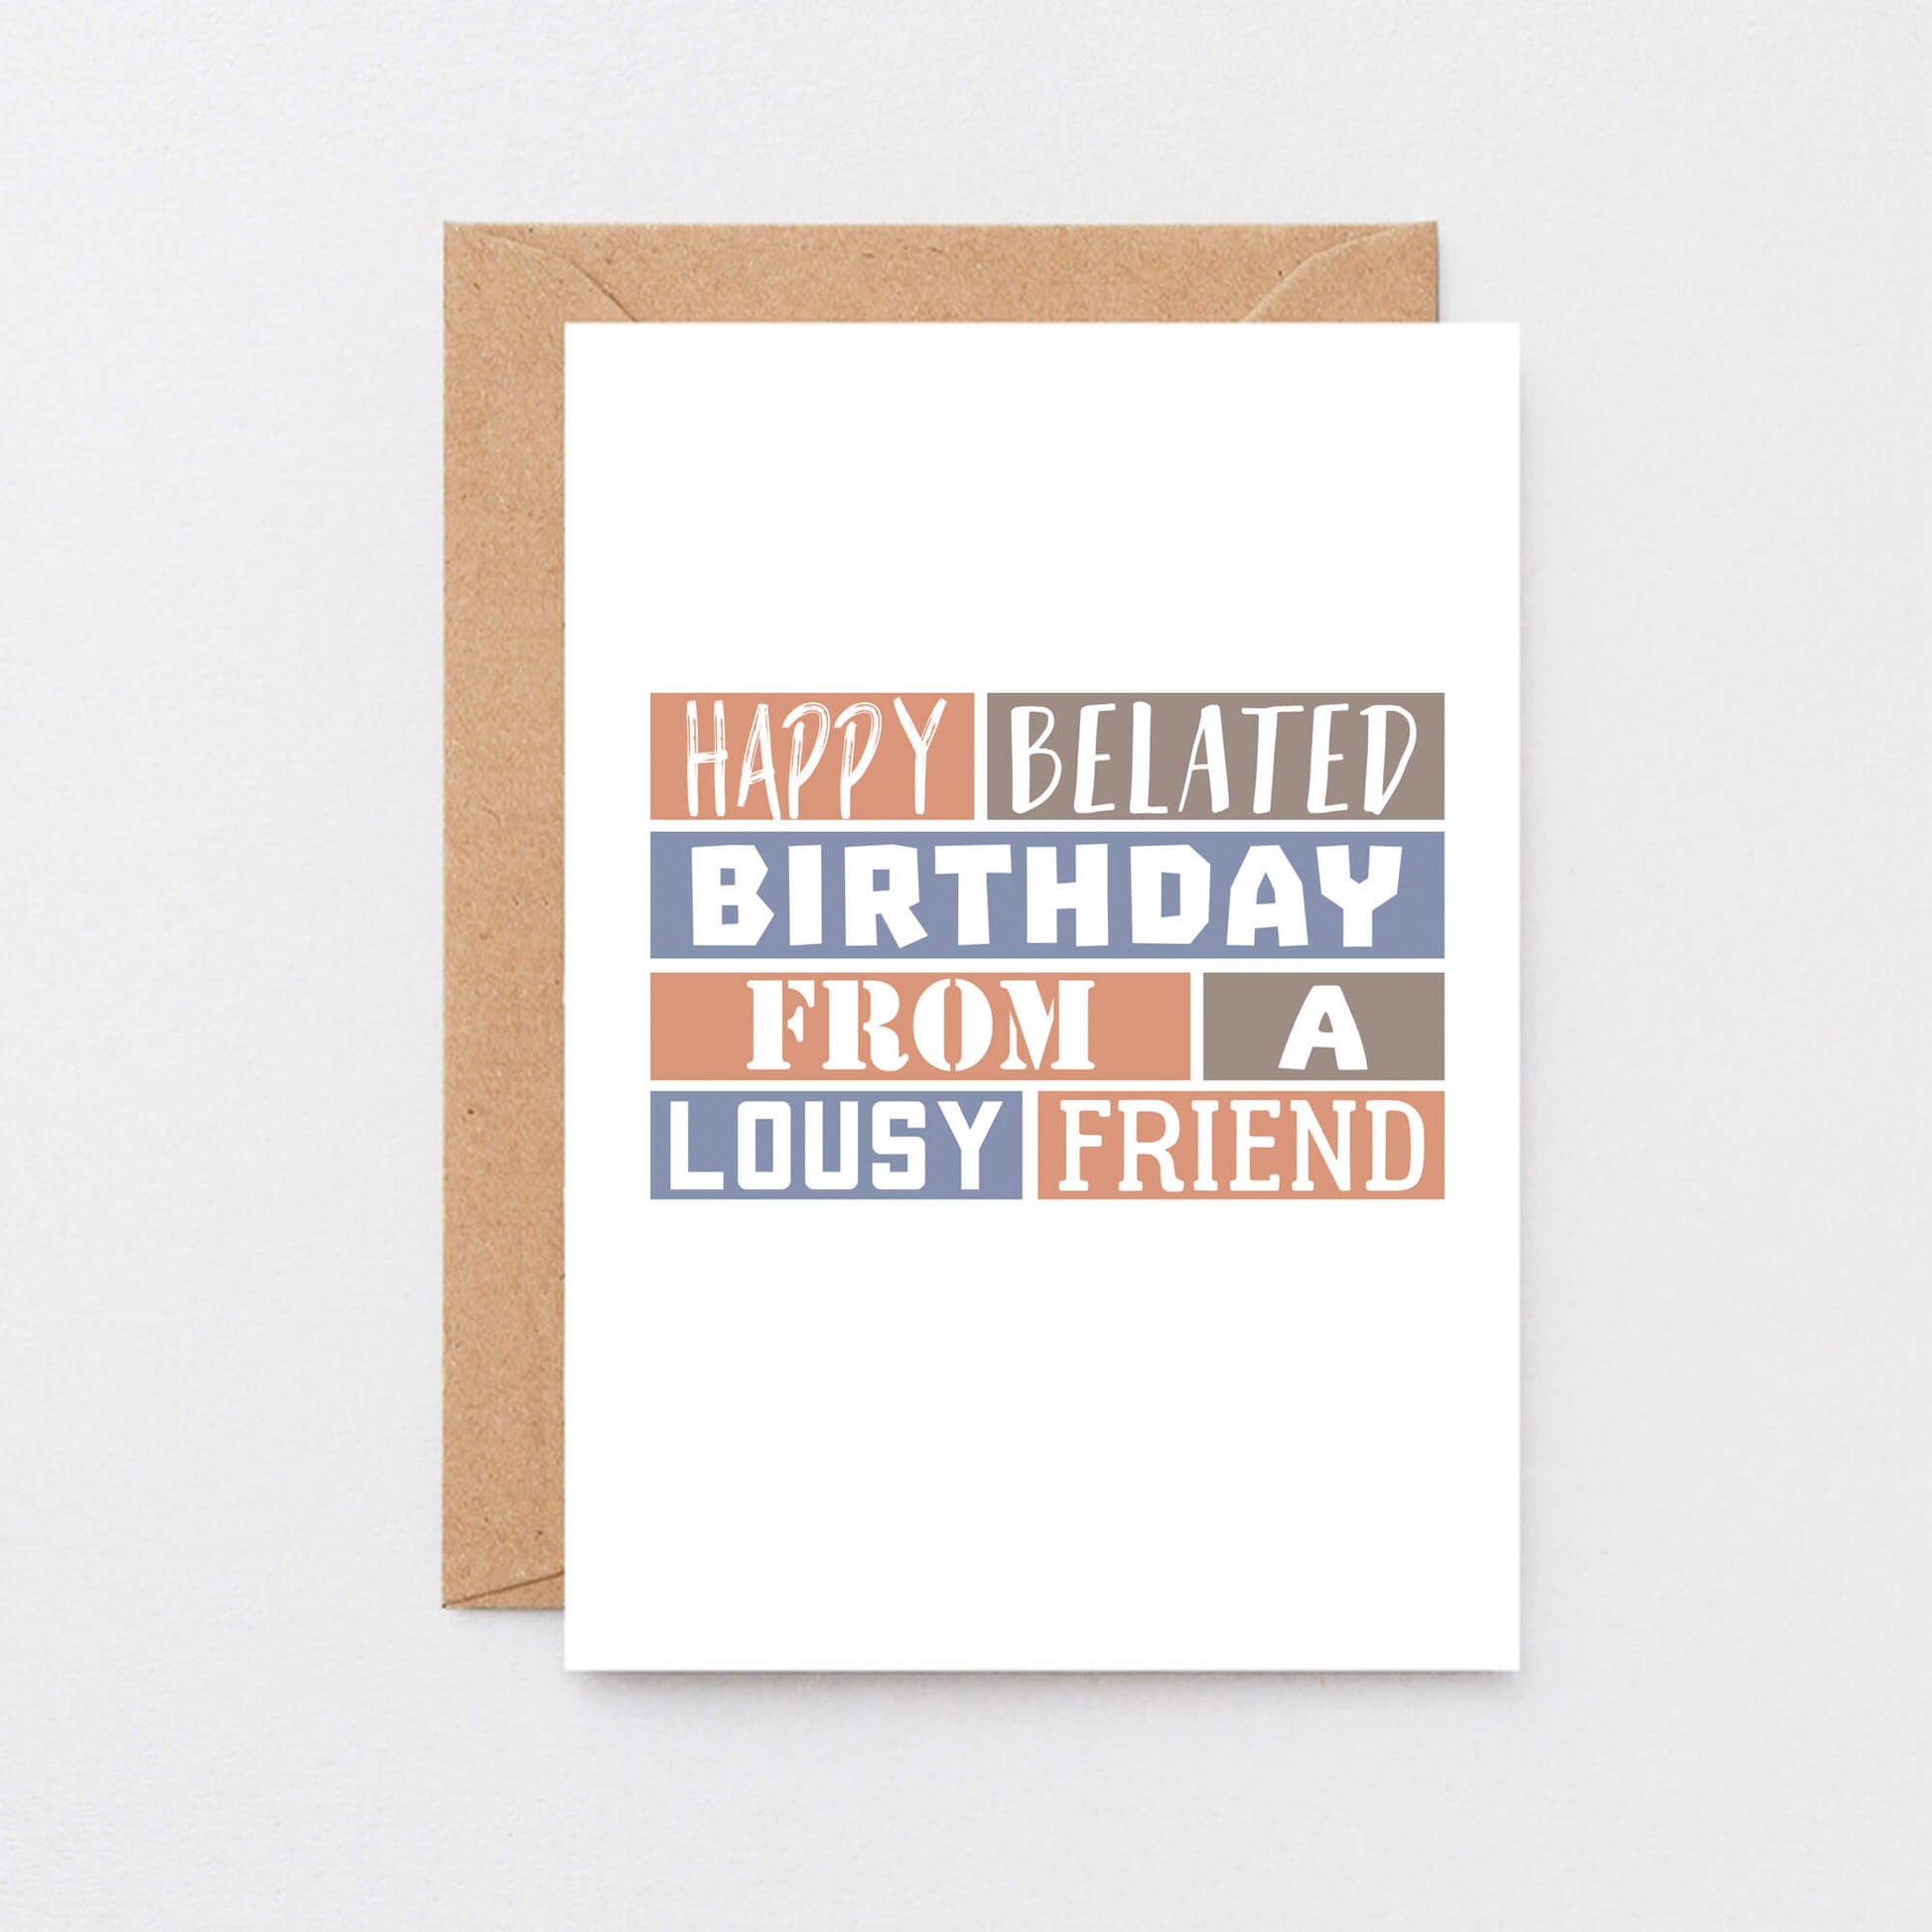 Belated Birthday Card by SixElevenCreations. Reads Happy belated birthday from a lousy friend. Product Code SE0274A6